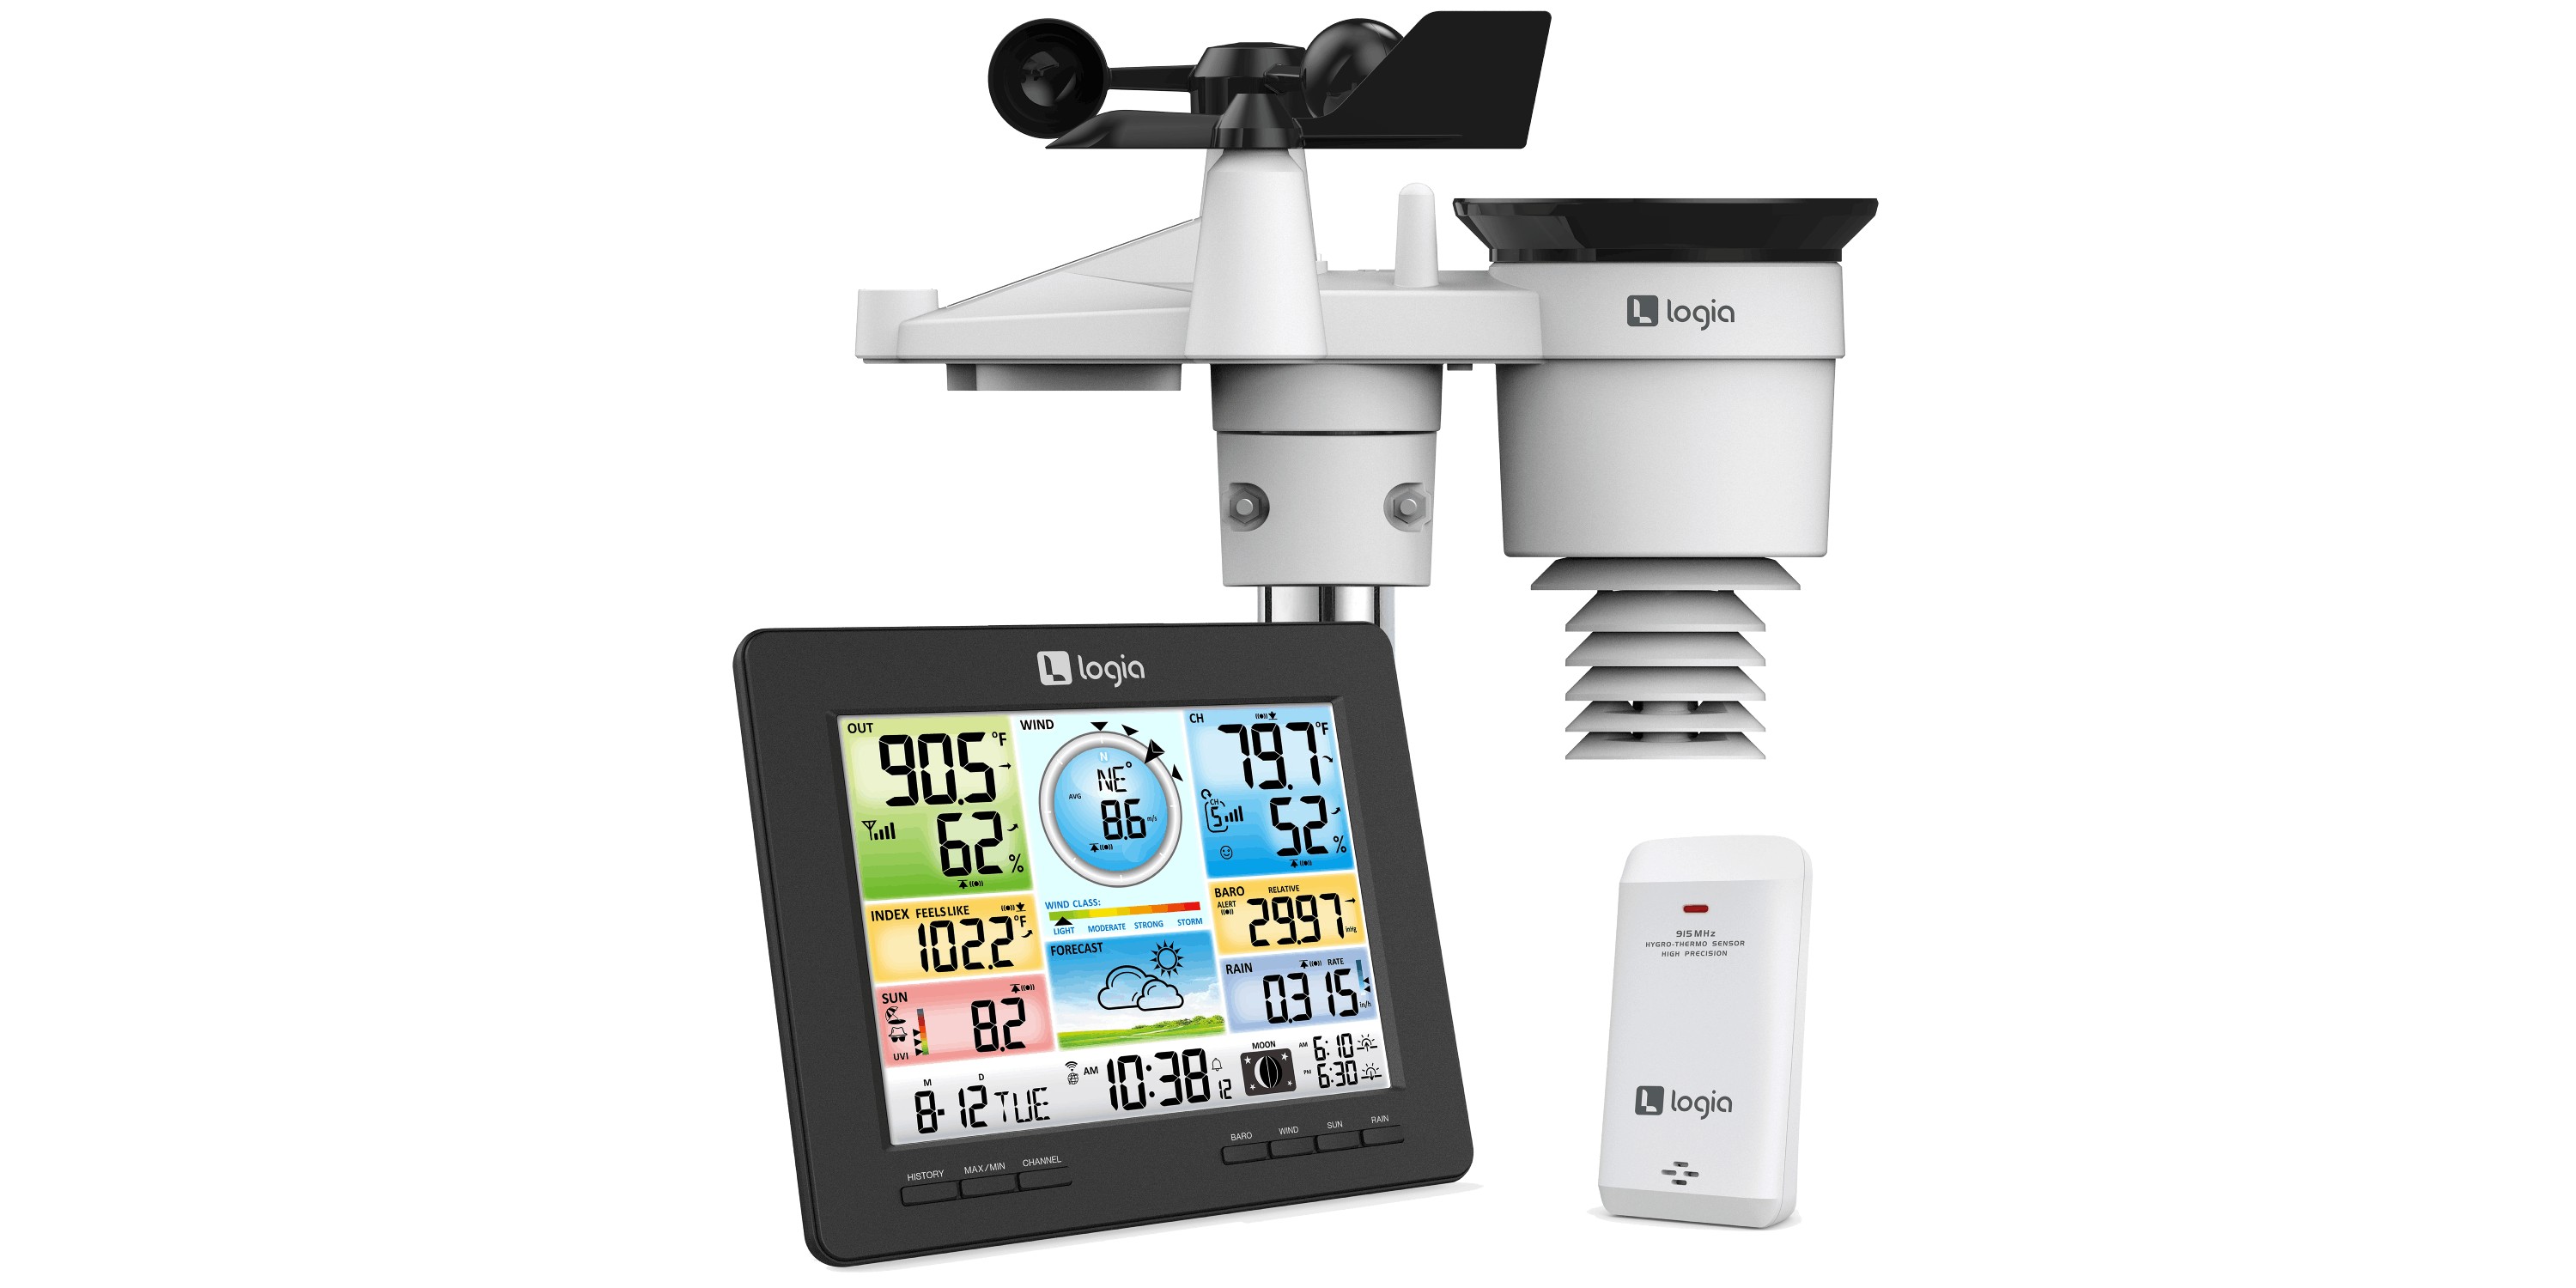 https://9to5toys.com/wp-content/uploads/sites/5/2021/04/logia-7-in-1-wi-fi-weather-monitoring-system.jpg